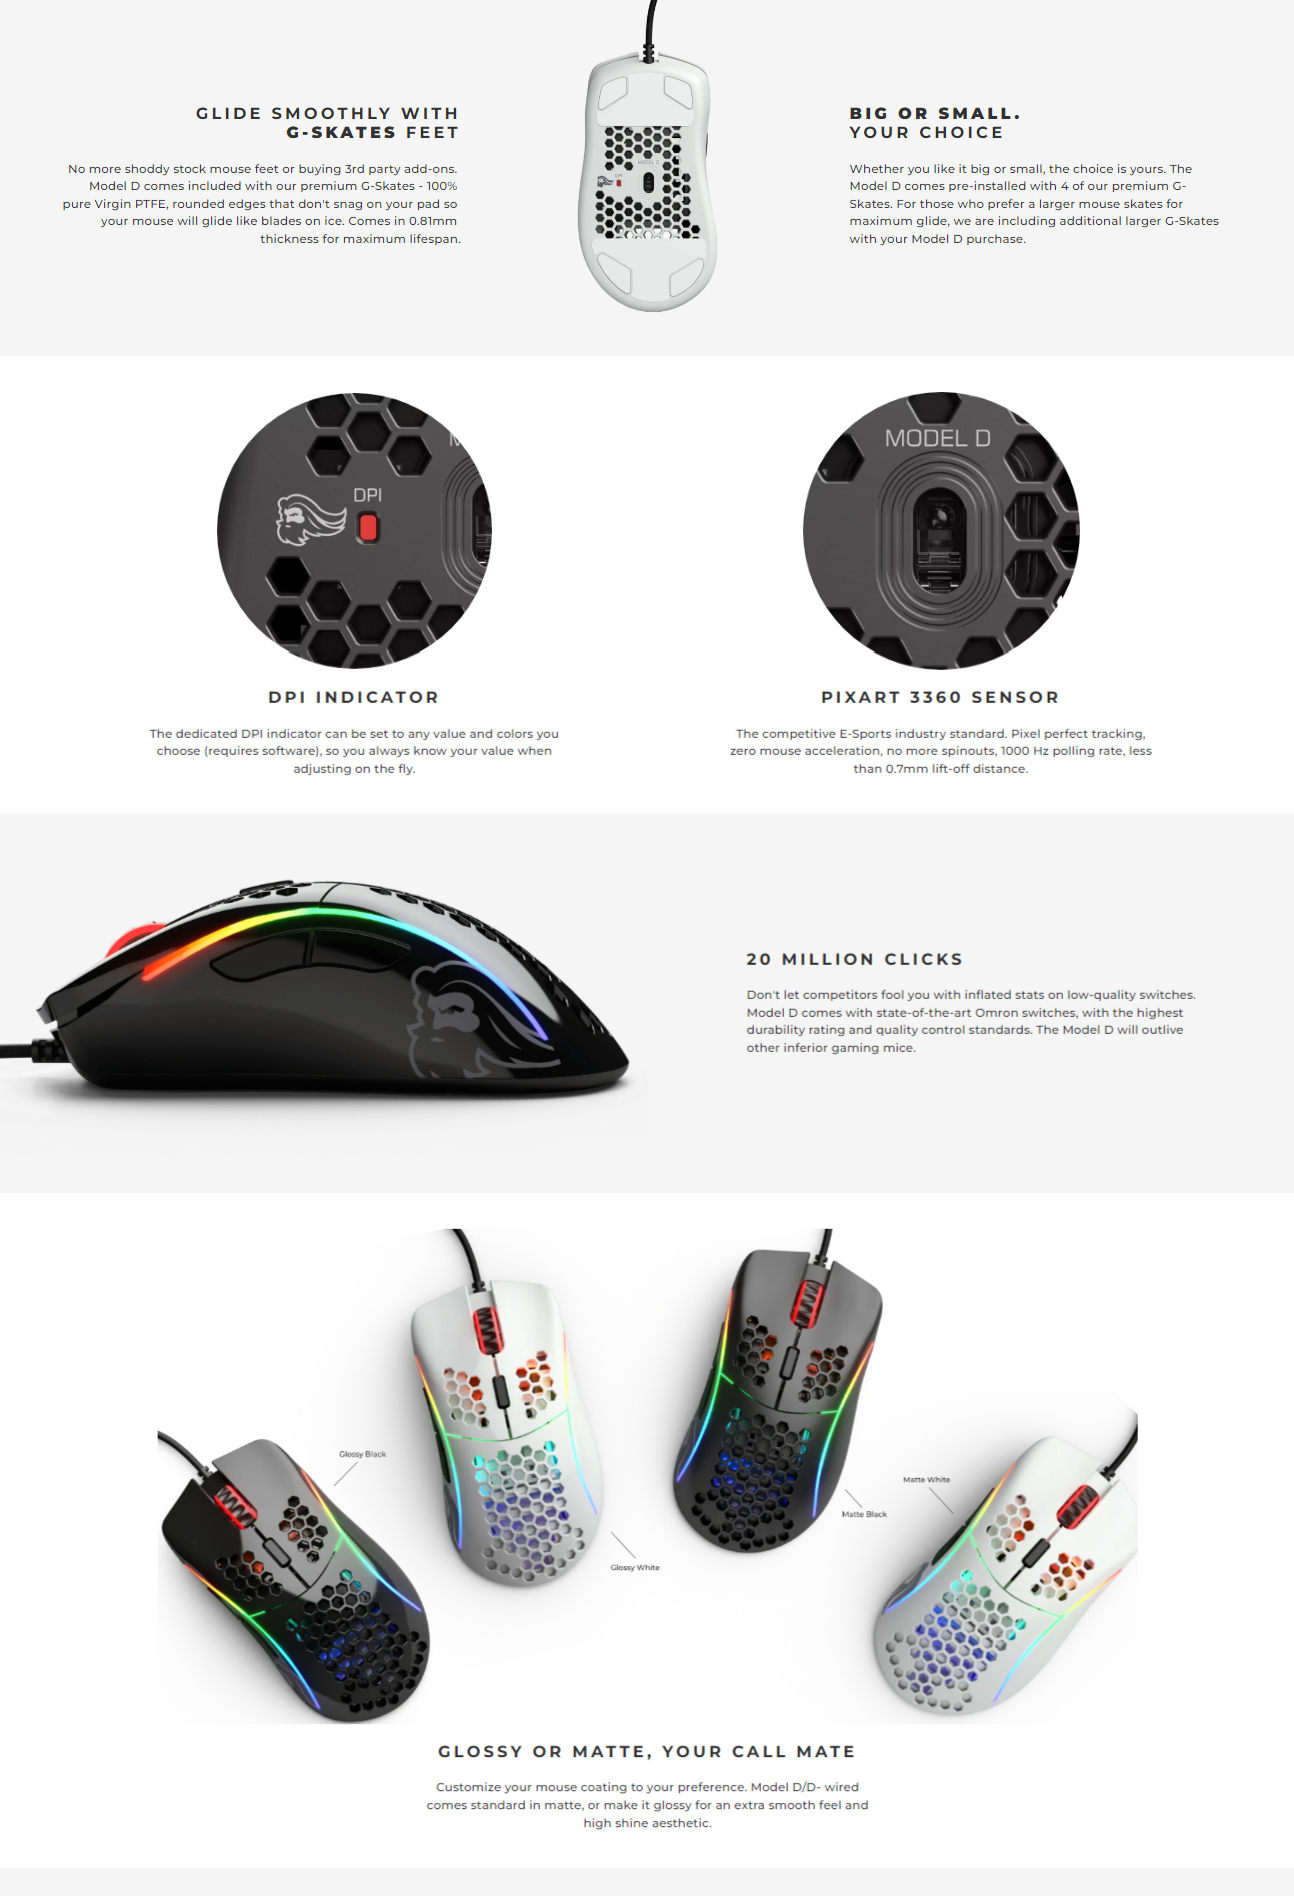 A large marketing image providing additional information about the product Glorious Model D Minus Wired Gaming Mouse - Glossy Black - Additional alt info not provided